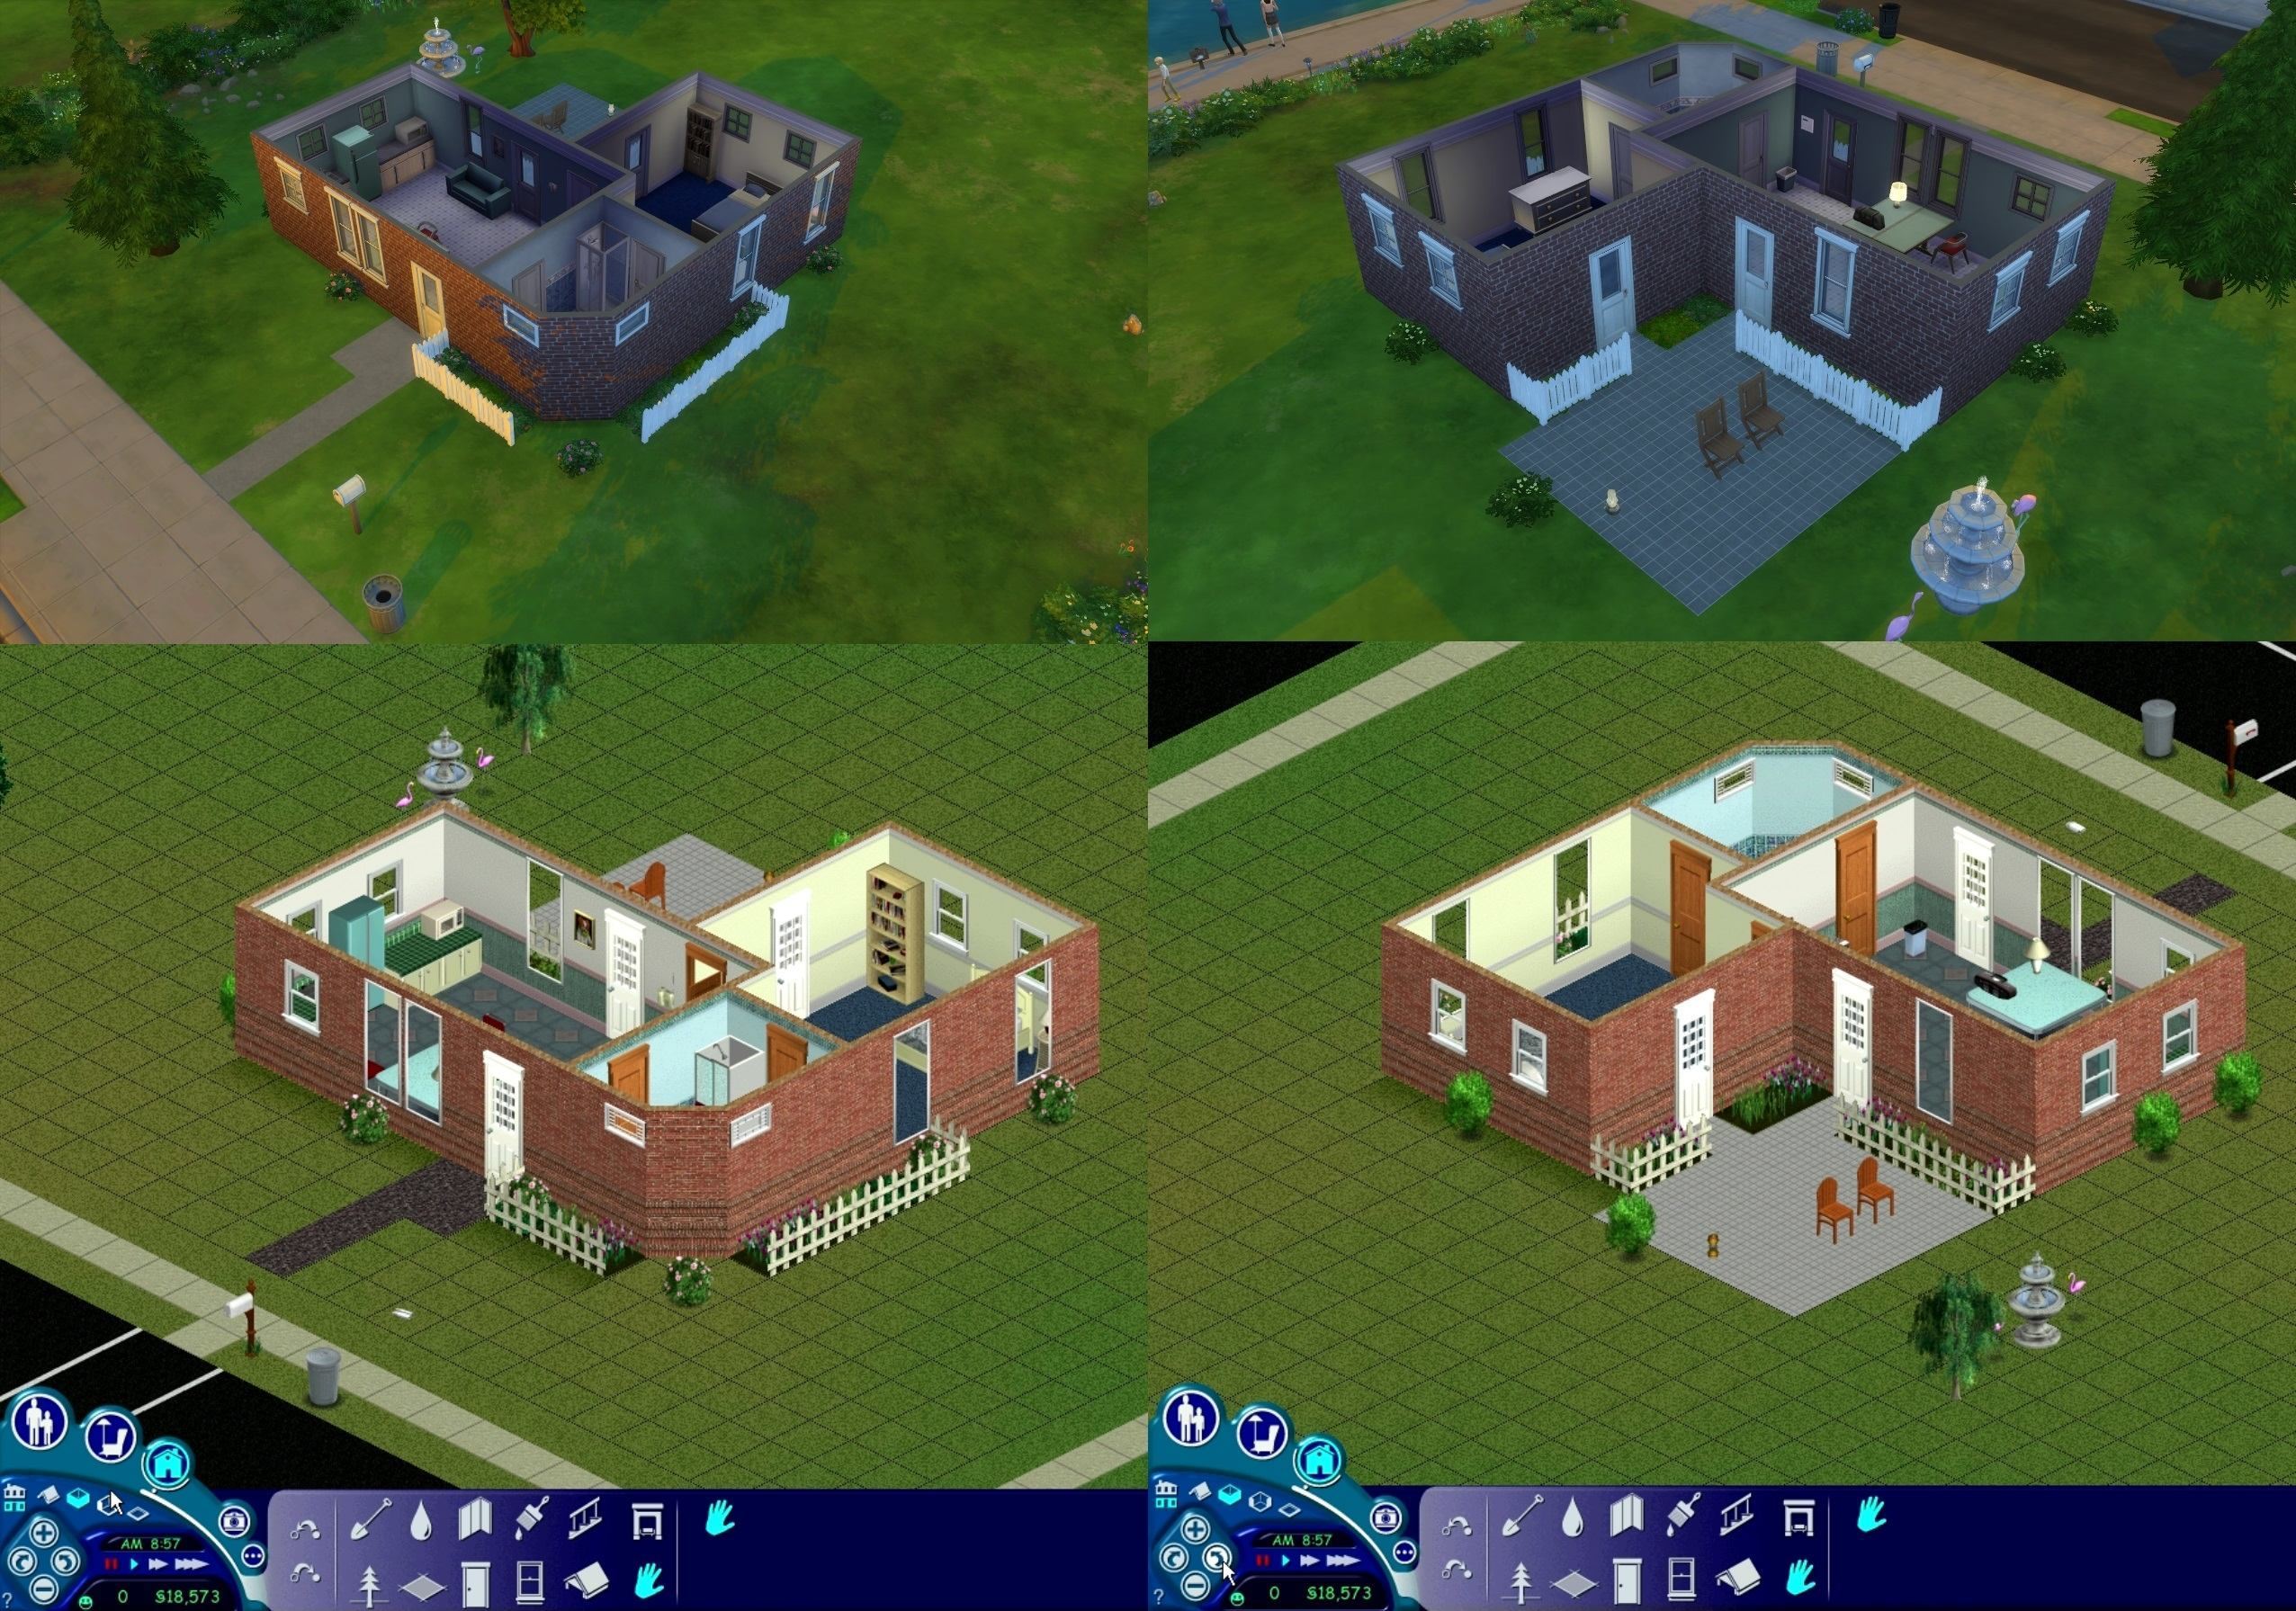 Sims 1 русский. The SIMS 1. SIMS 1 дома. SIMS 1 город. The SIMS 1 DLC.